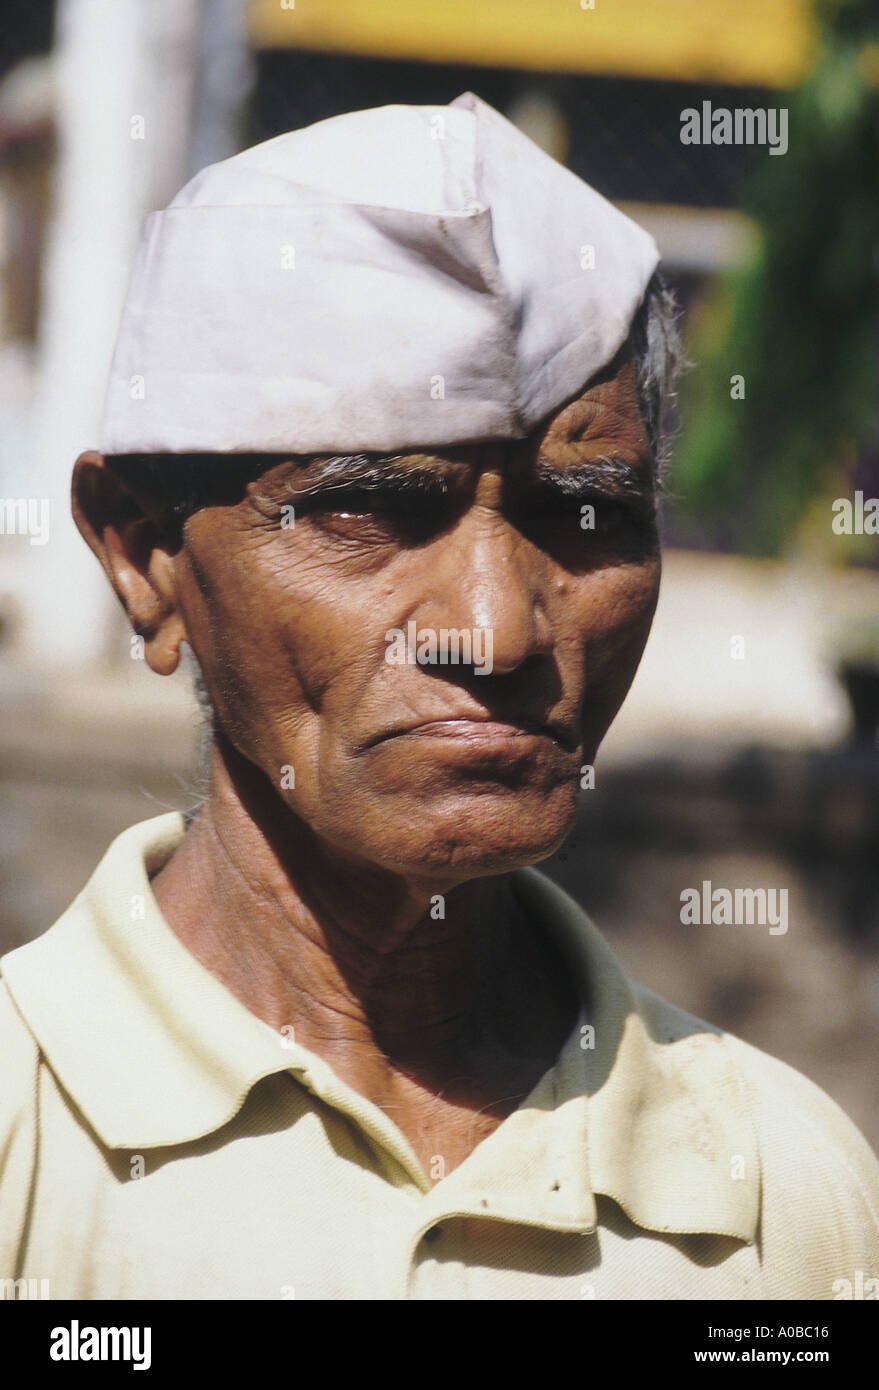 An old man from Goa, India. Stock Photo